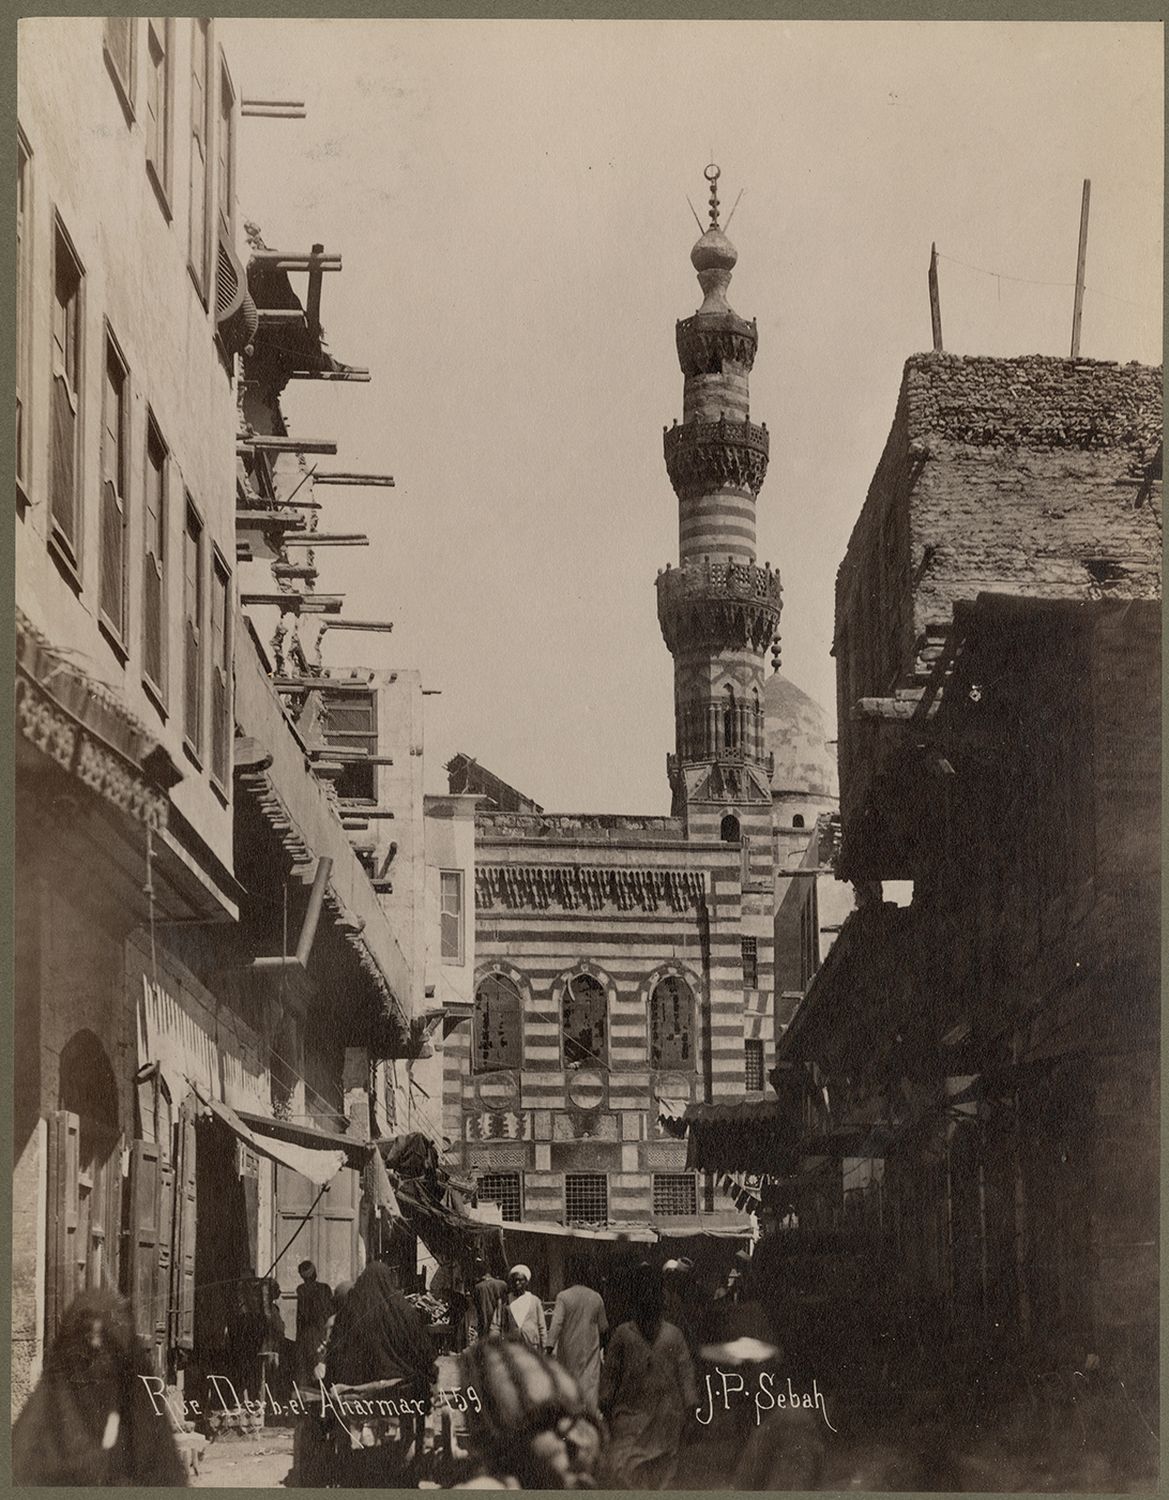 View along street in Darb al-Ahmar neighborhood, facing southeast. The ablaq facade of the Mosque of Amir Qijmas al-Ishaqi is visible at a bend in the street.